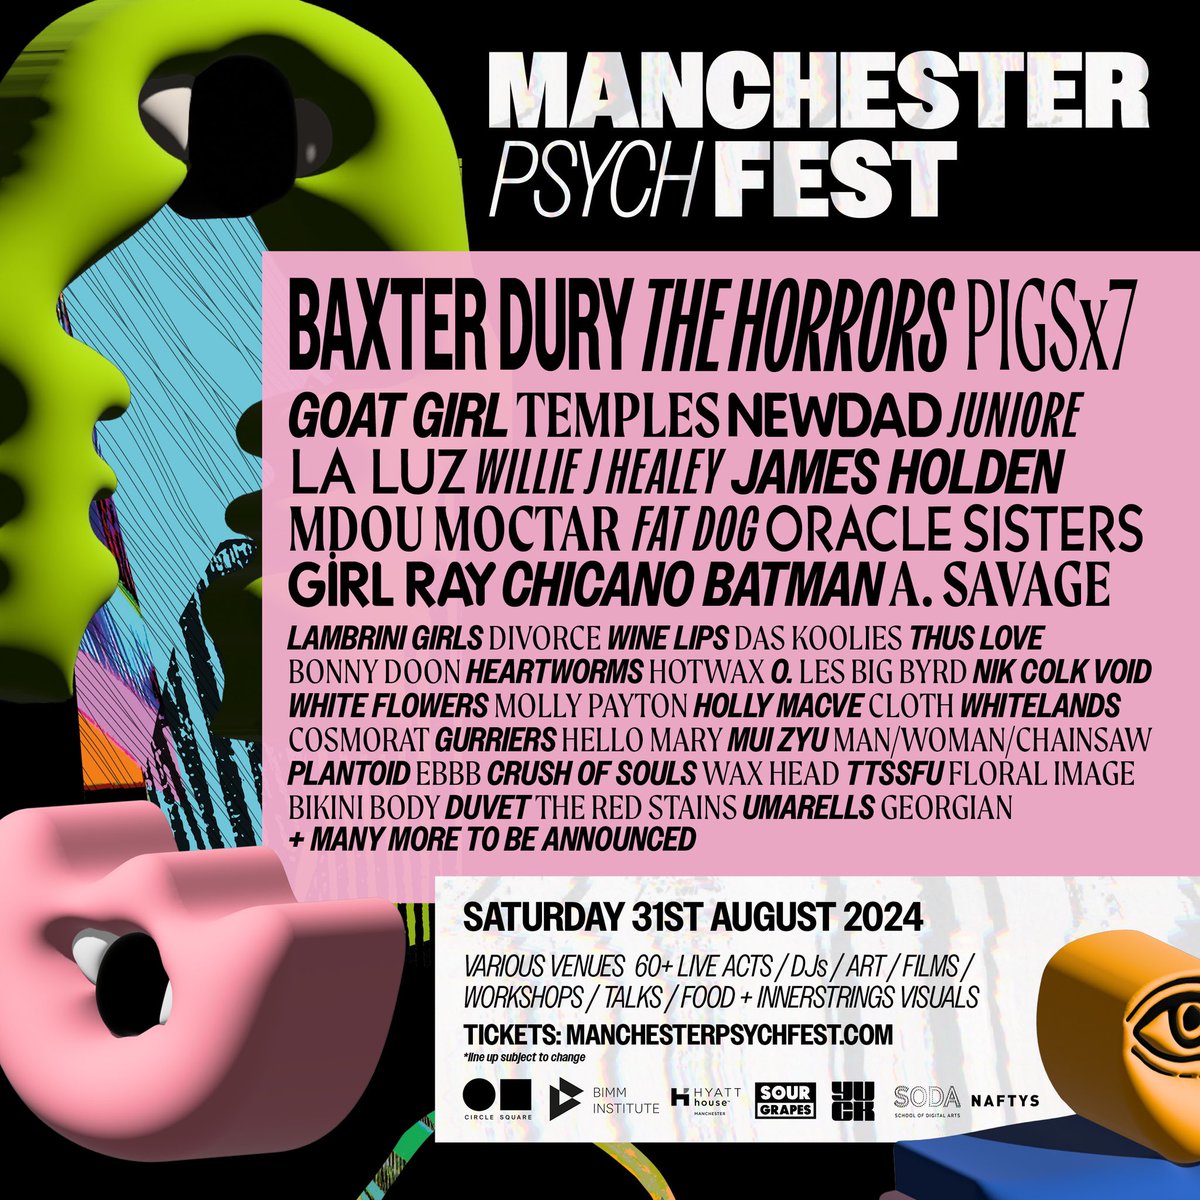 Hey stainy babes!! Excited to announce we are joining the line up for @mancpsychfest 💋🫶🏻💋🫶🏻💋 31st August SAVE THE DATE 💕💕 tickets available at manchesterpsychfest.com